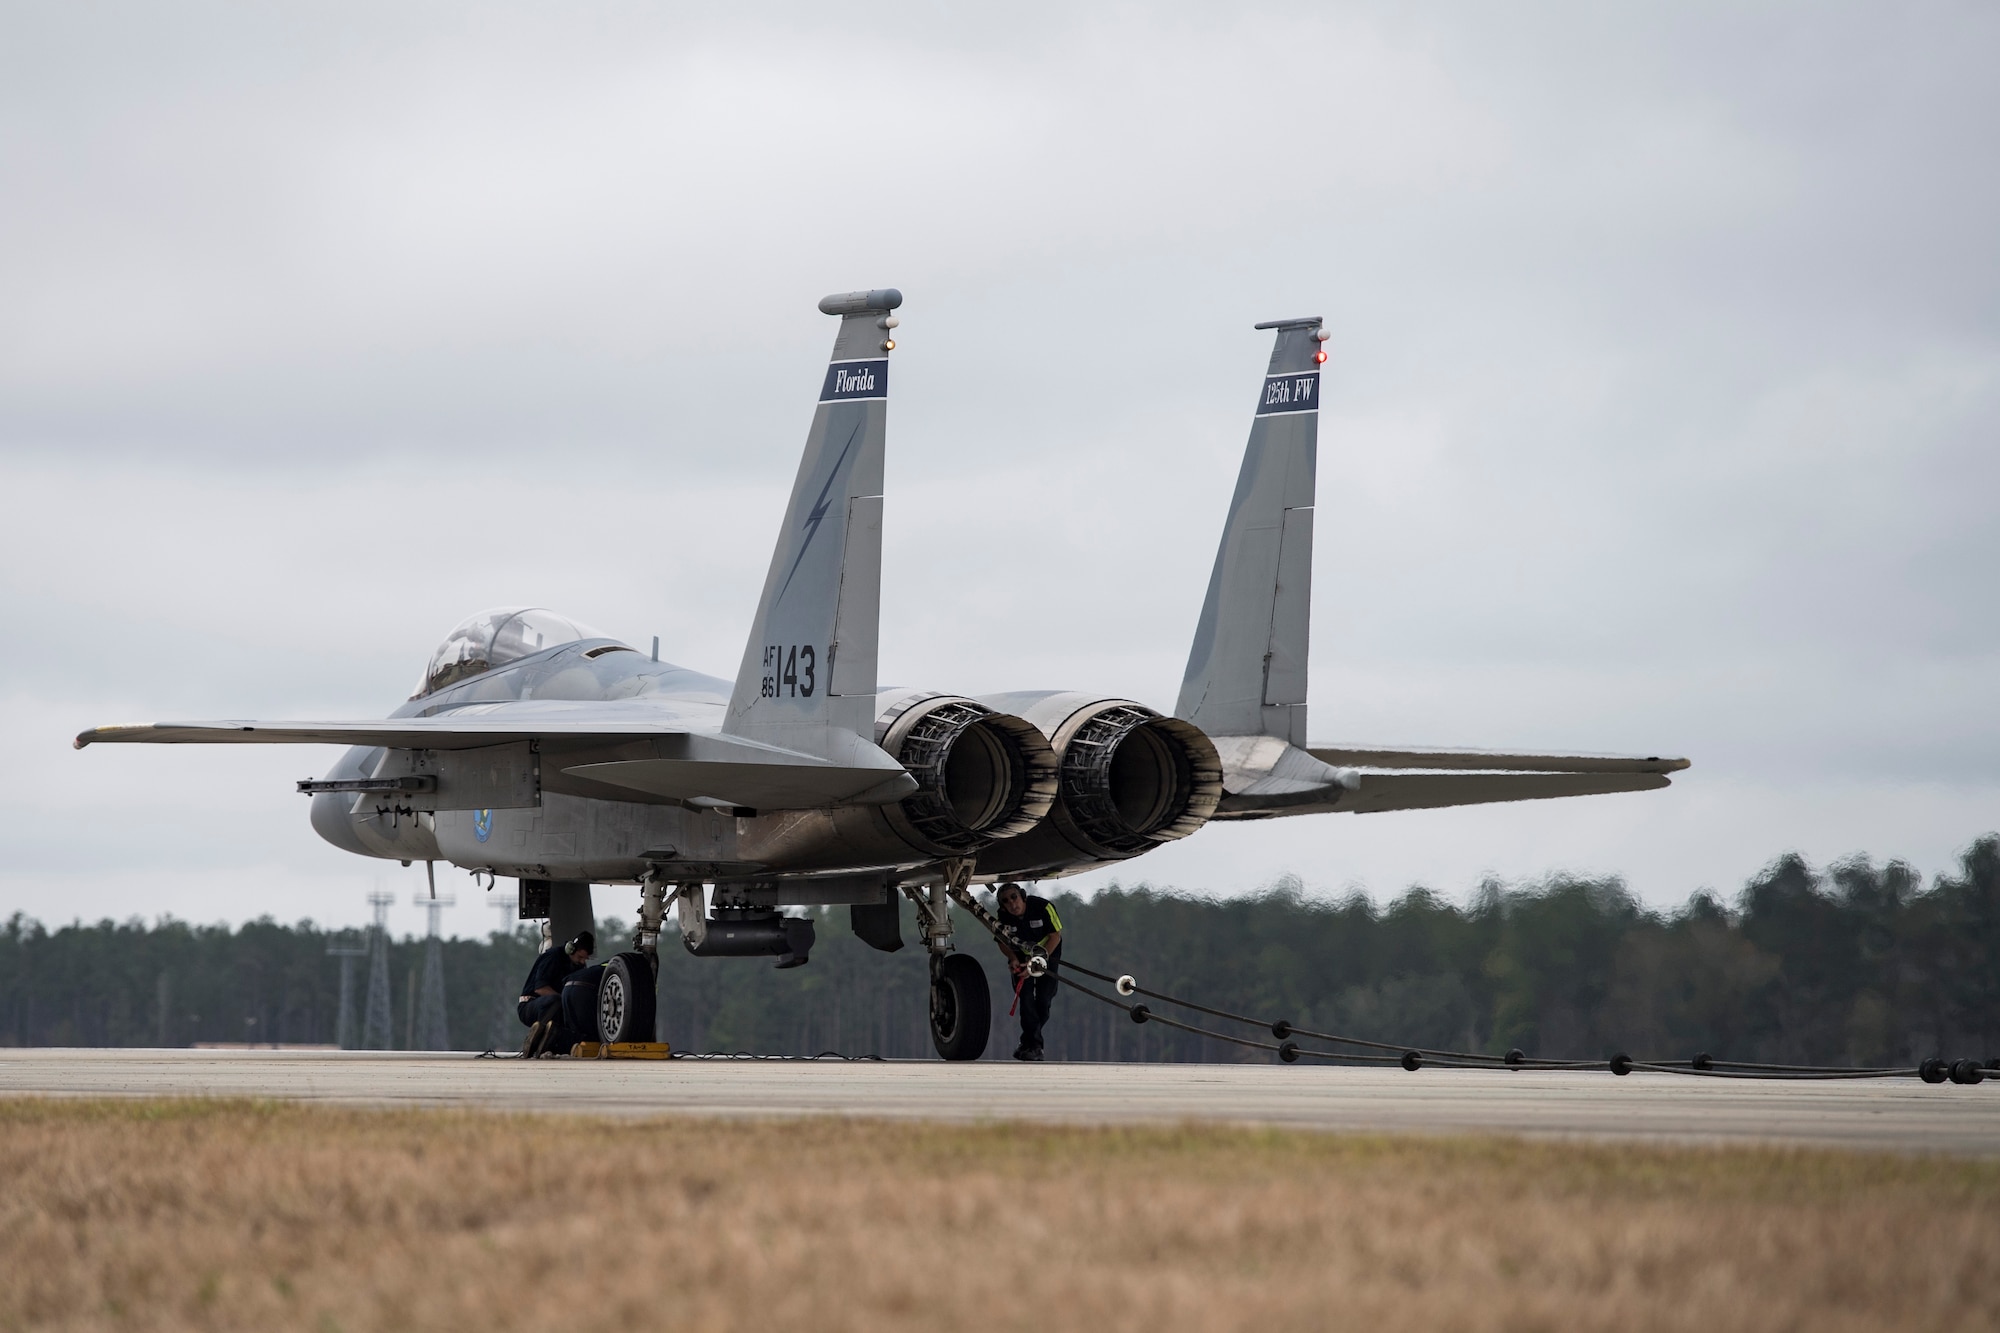 Crew chiefs prepare to release an F-15C Eagle from an arresting system, Dec. 19, 2017, at Moody Air Force Base, Ga. The BAK-12 arresting system is used on the runway to slow down fighter aircraft in emergency situations. The previous beam has been on Moody’s flightline since 1998, but under new guidelines will now be replaced every 10 years. (U.S. Air Force photo by Senior Airman Janiqua P. Robinson)